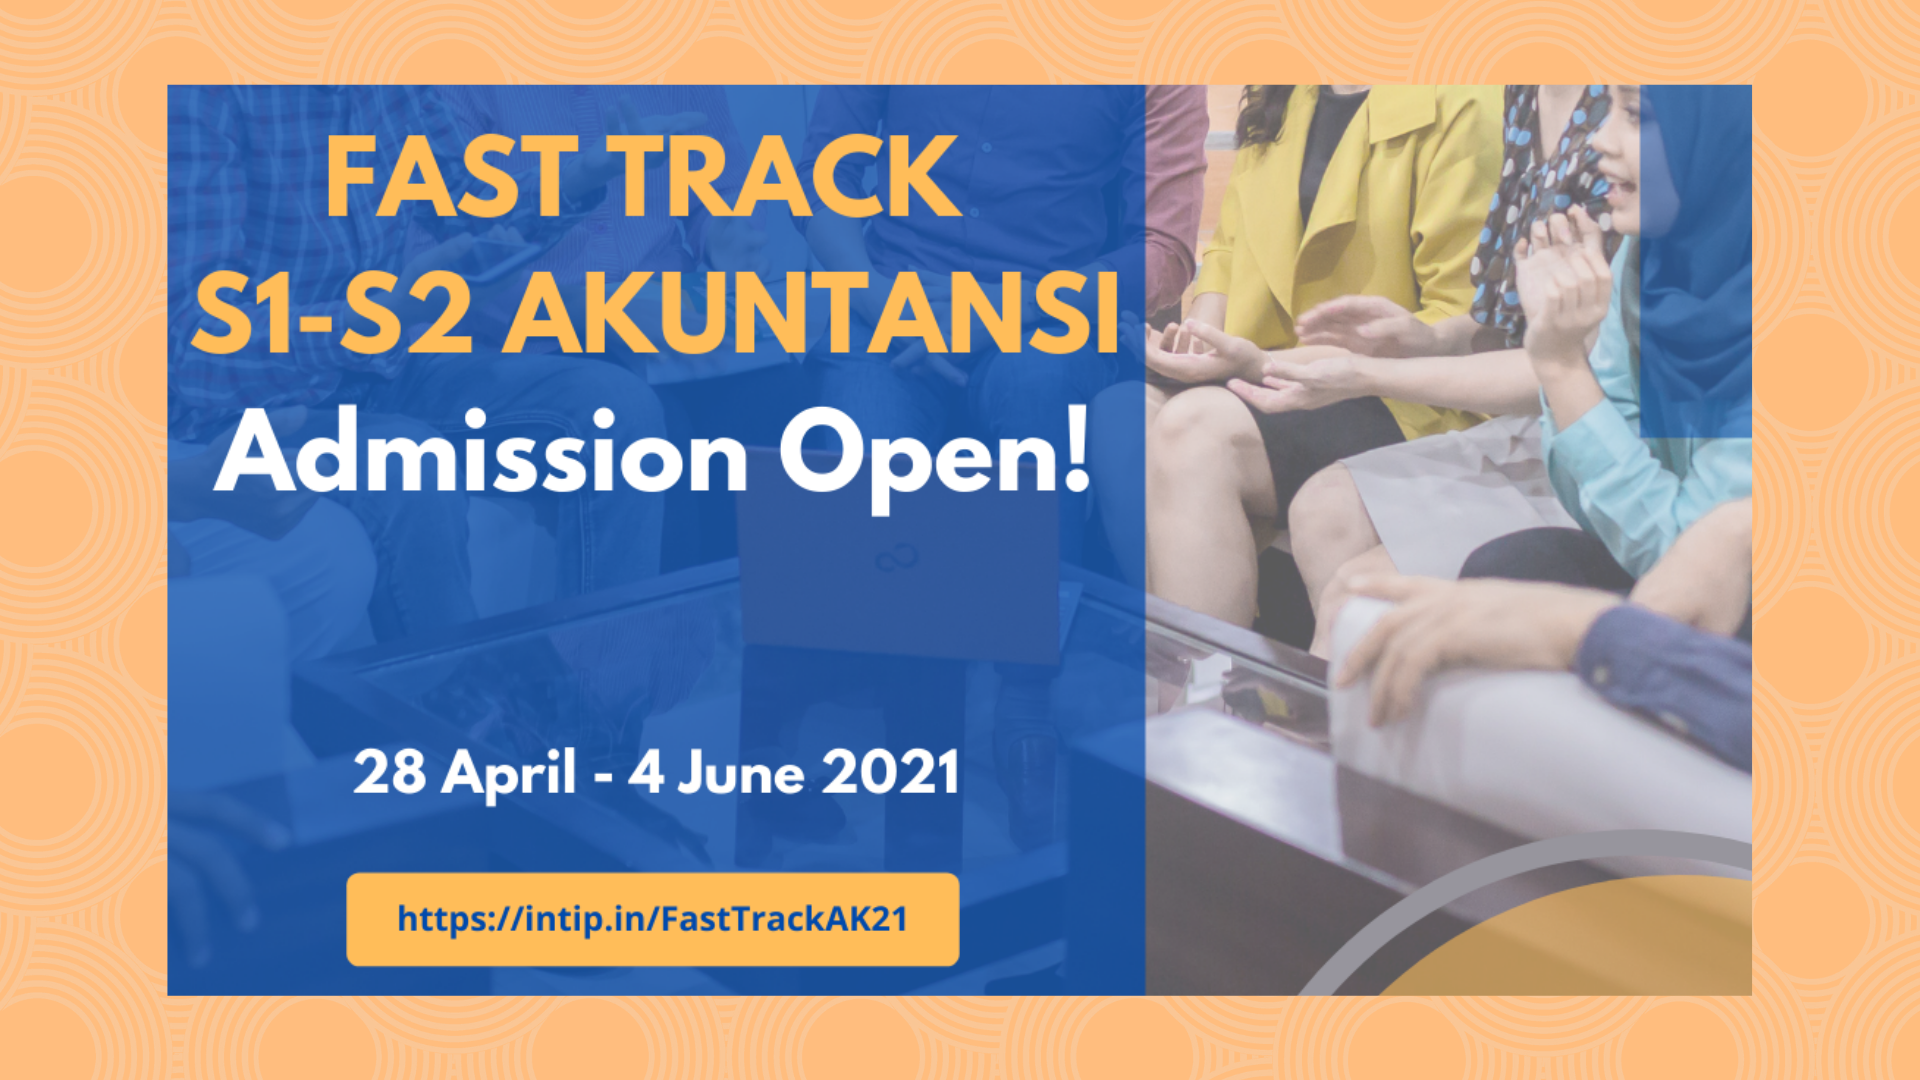 Fast Track S1-S2 Akuntansi: Admission Open!